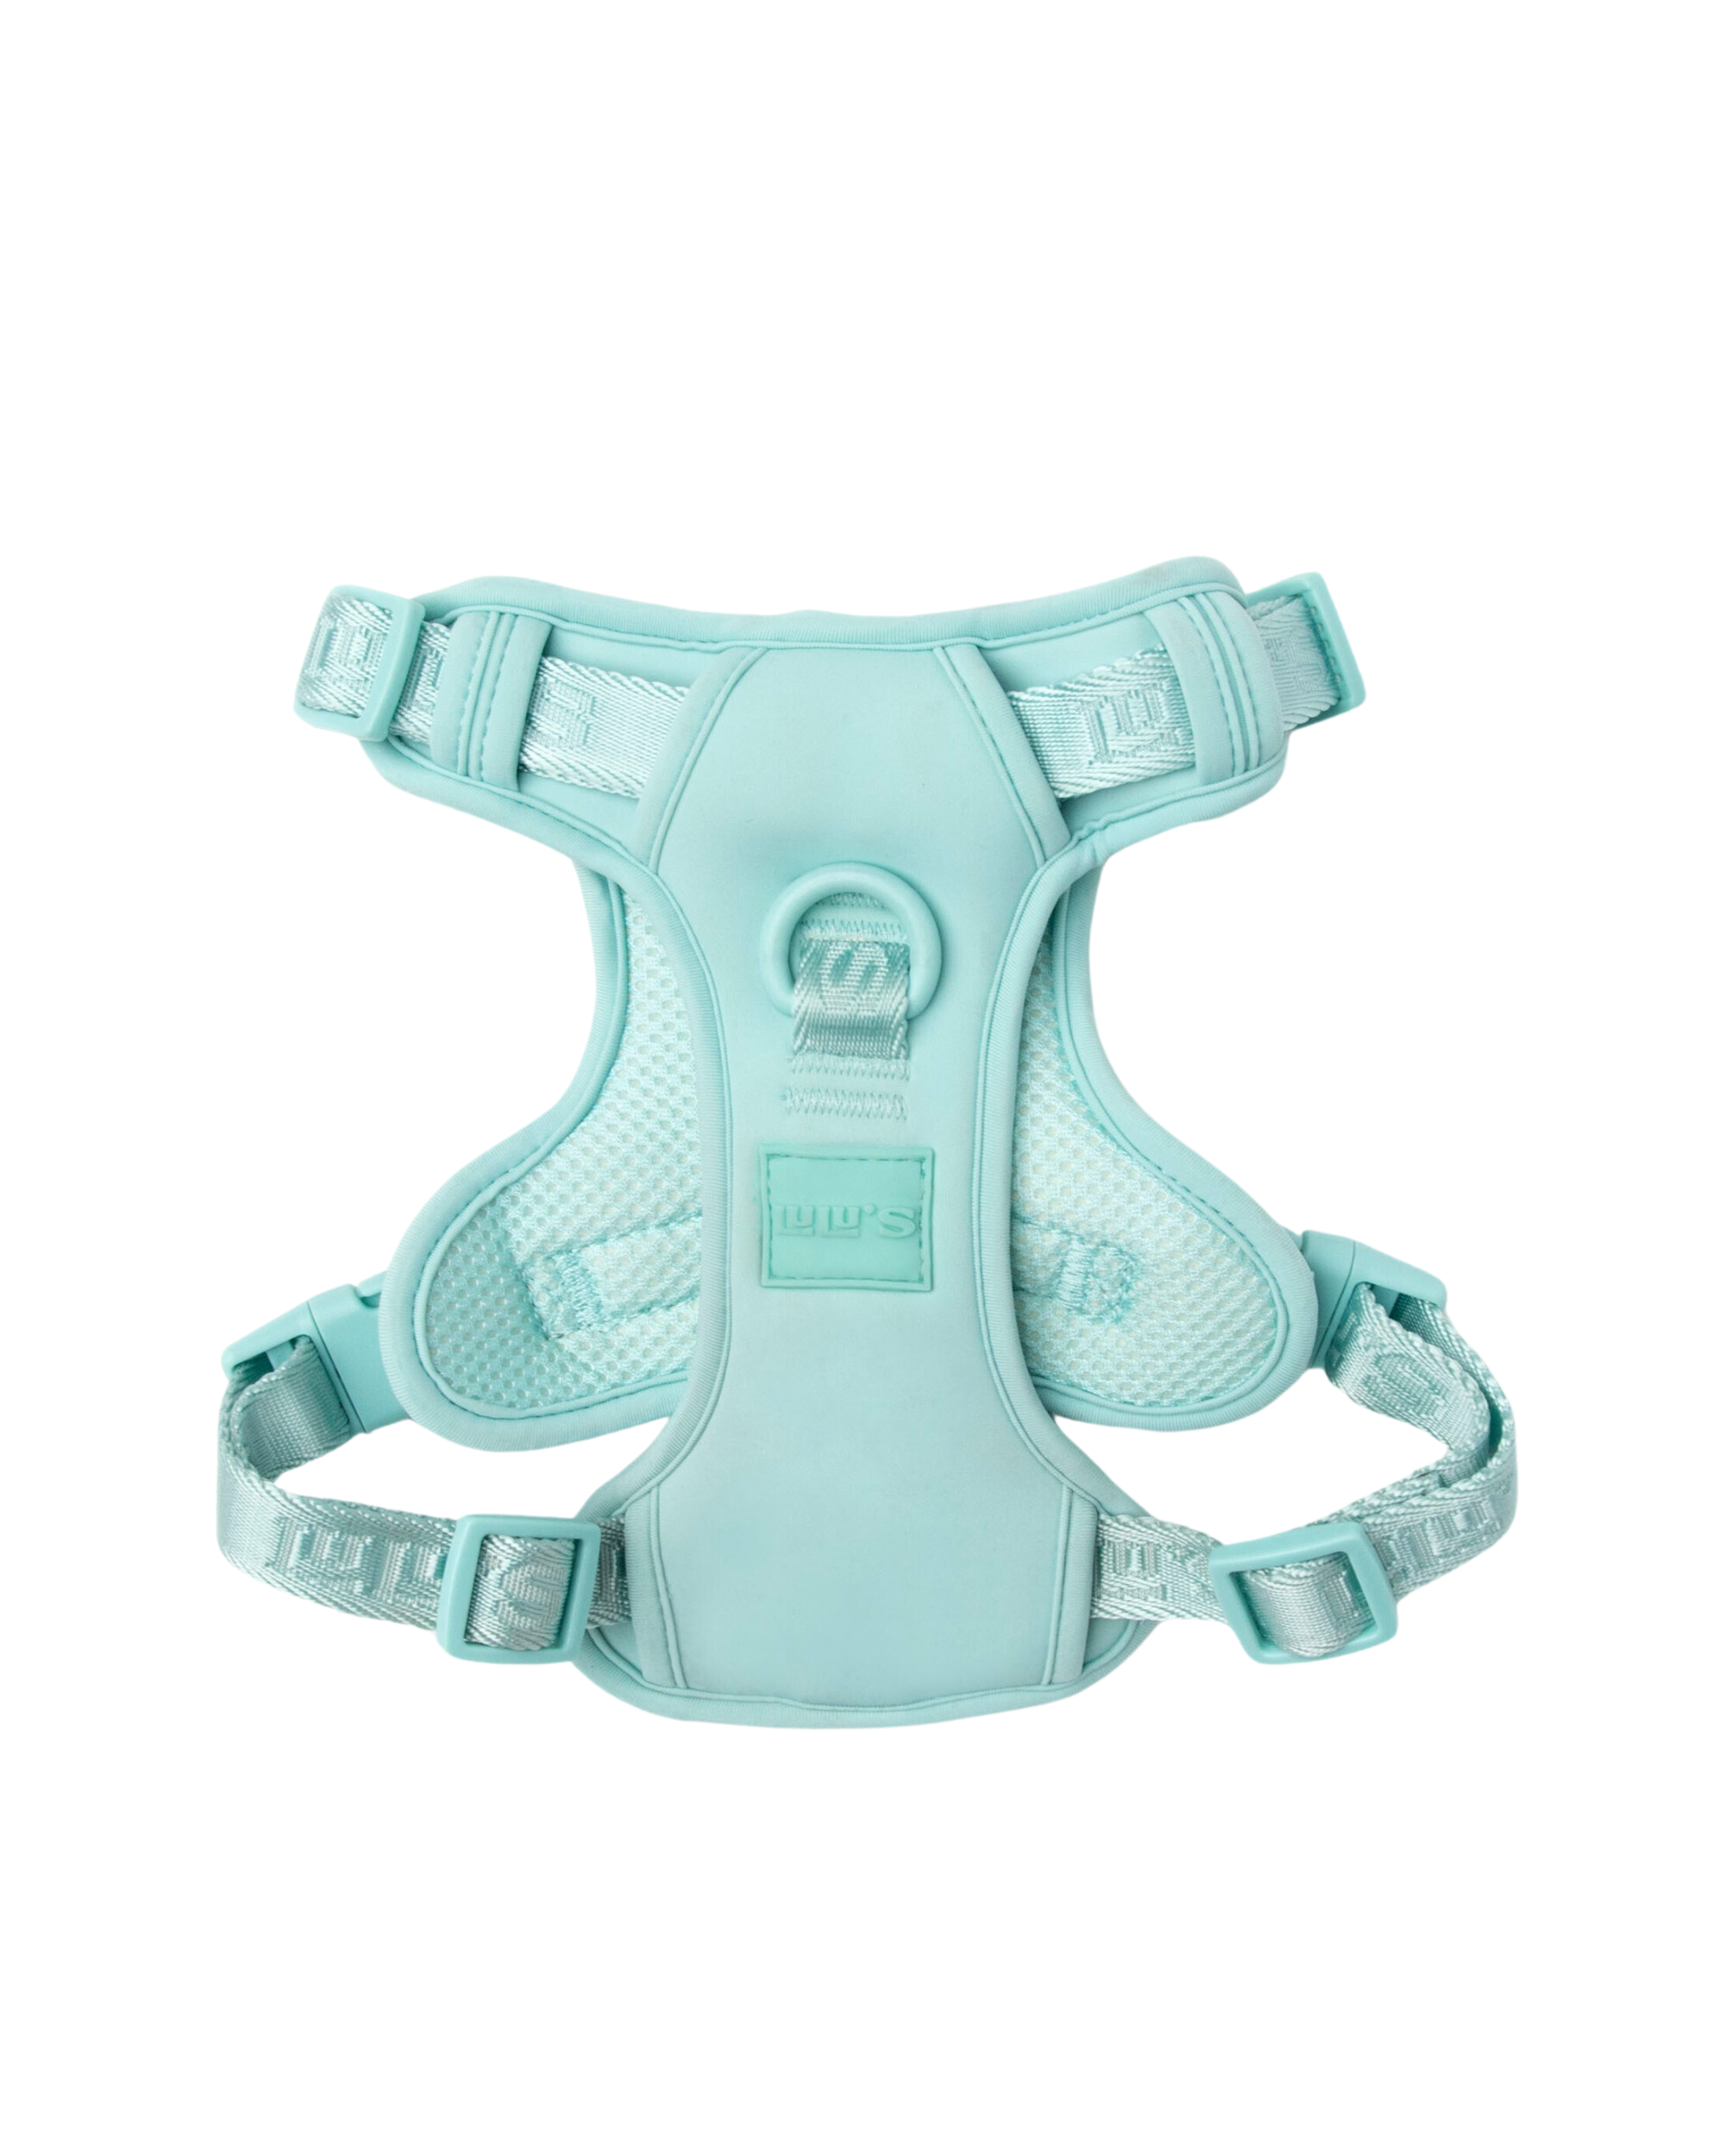 Back view of a Cali Blue dog harness, showcasing its adjustable straps, breathable mesh design, and secure fastening system